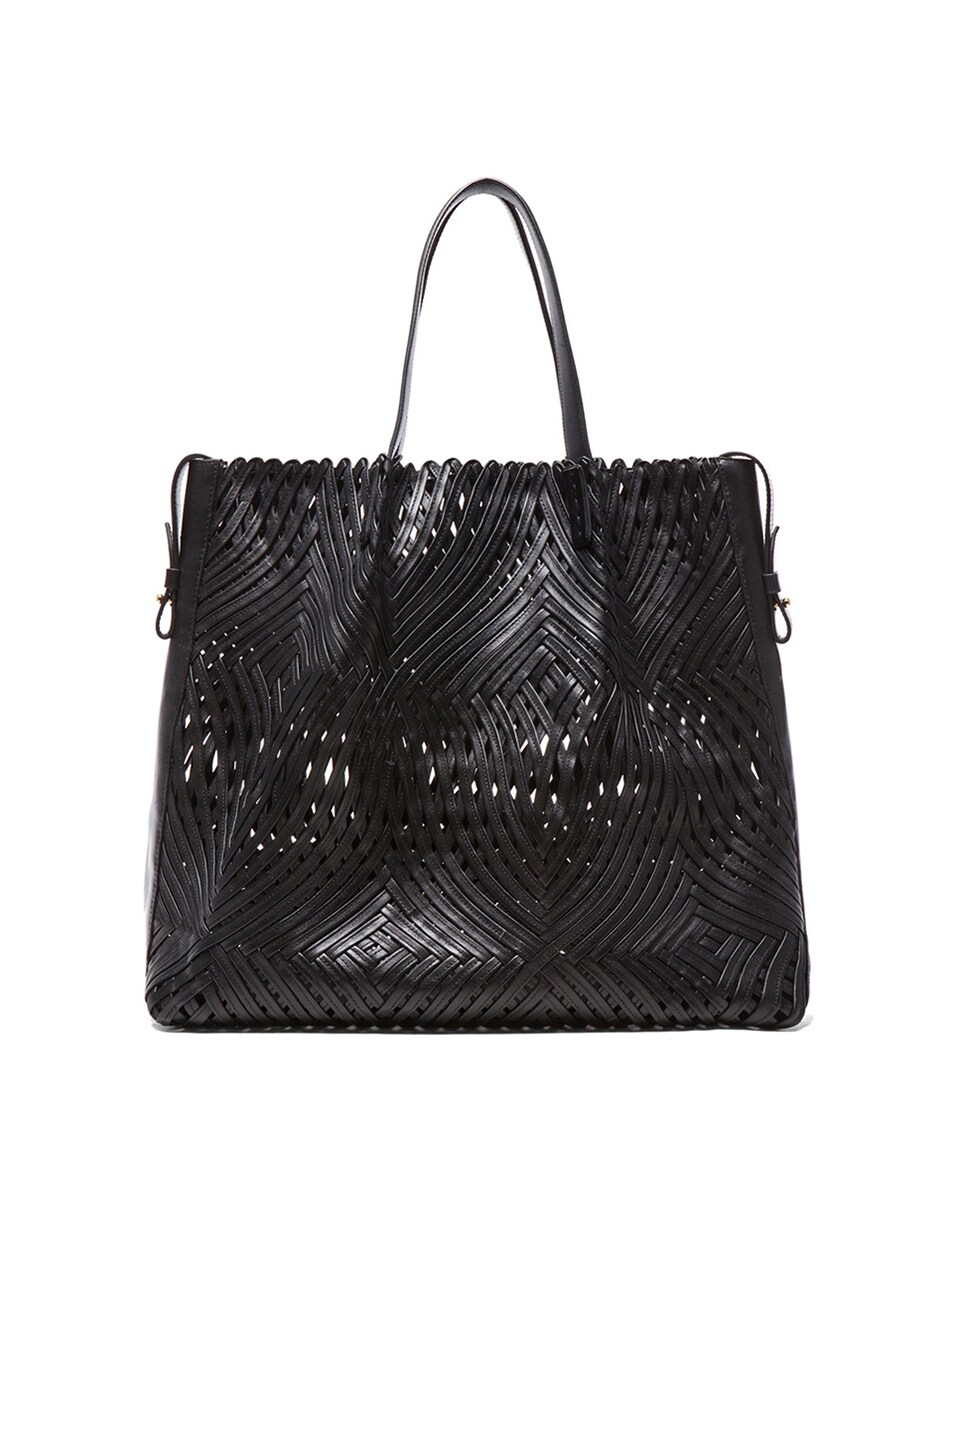 Image 1 of Nina Ricci Woven Tote in Noir